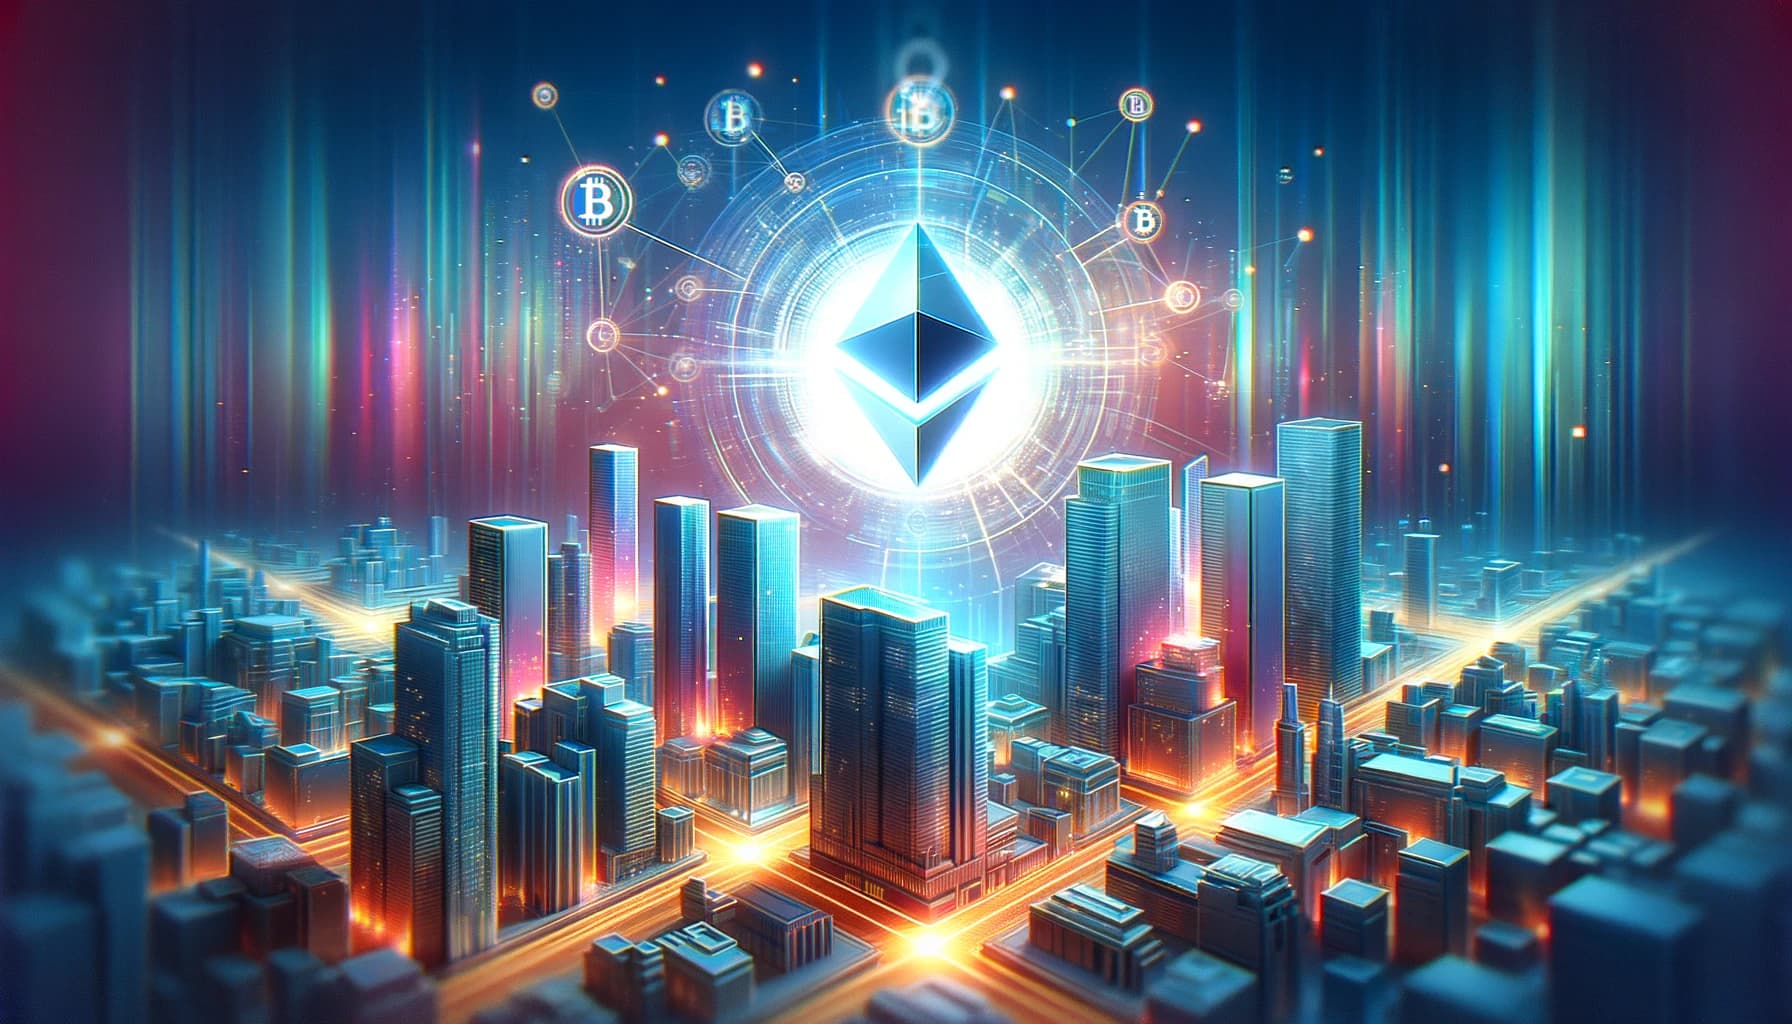 Bucket Technologies image showing a well-lit downtown portion of a city with a large blockchain logo floating in the night sky above surrounded by much smaller bitcoin logos almost like stars.